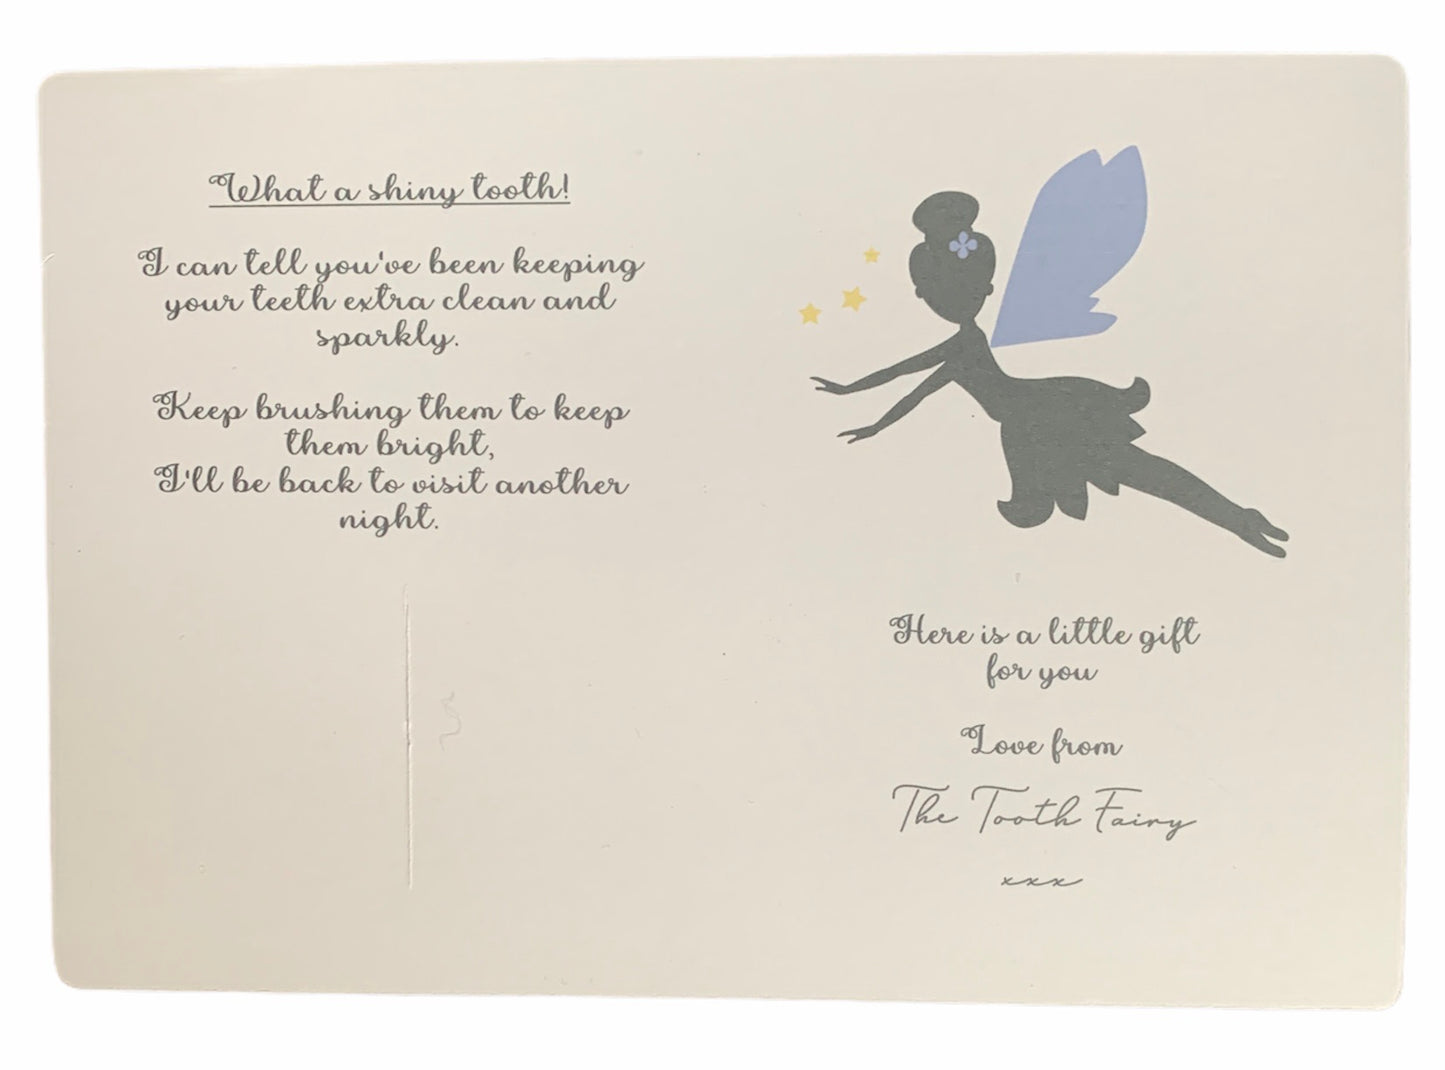 Tooth Fairy Bow and Card